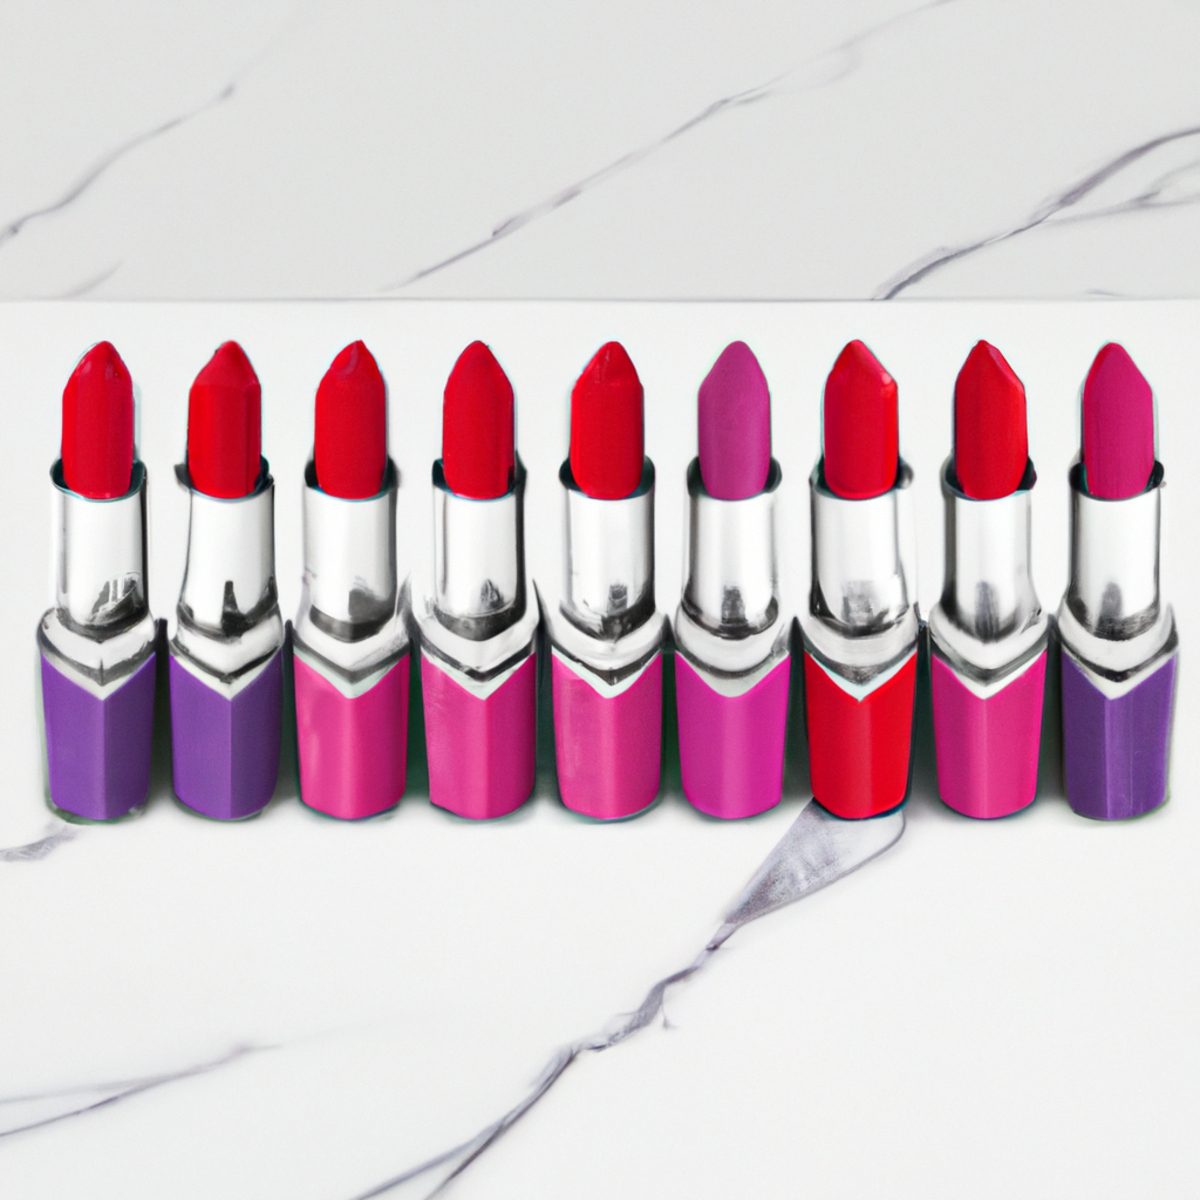 Bold lip colors - Vibrant lipsticks in fiery reds, deep purples, and electric pinks are meticulously displayed on a sleek marble countertop.